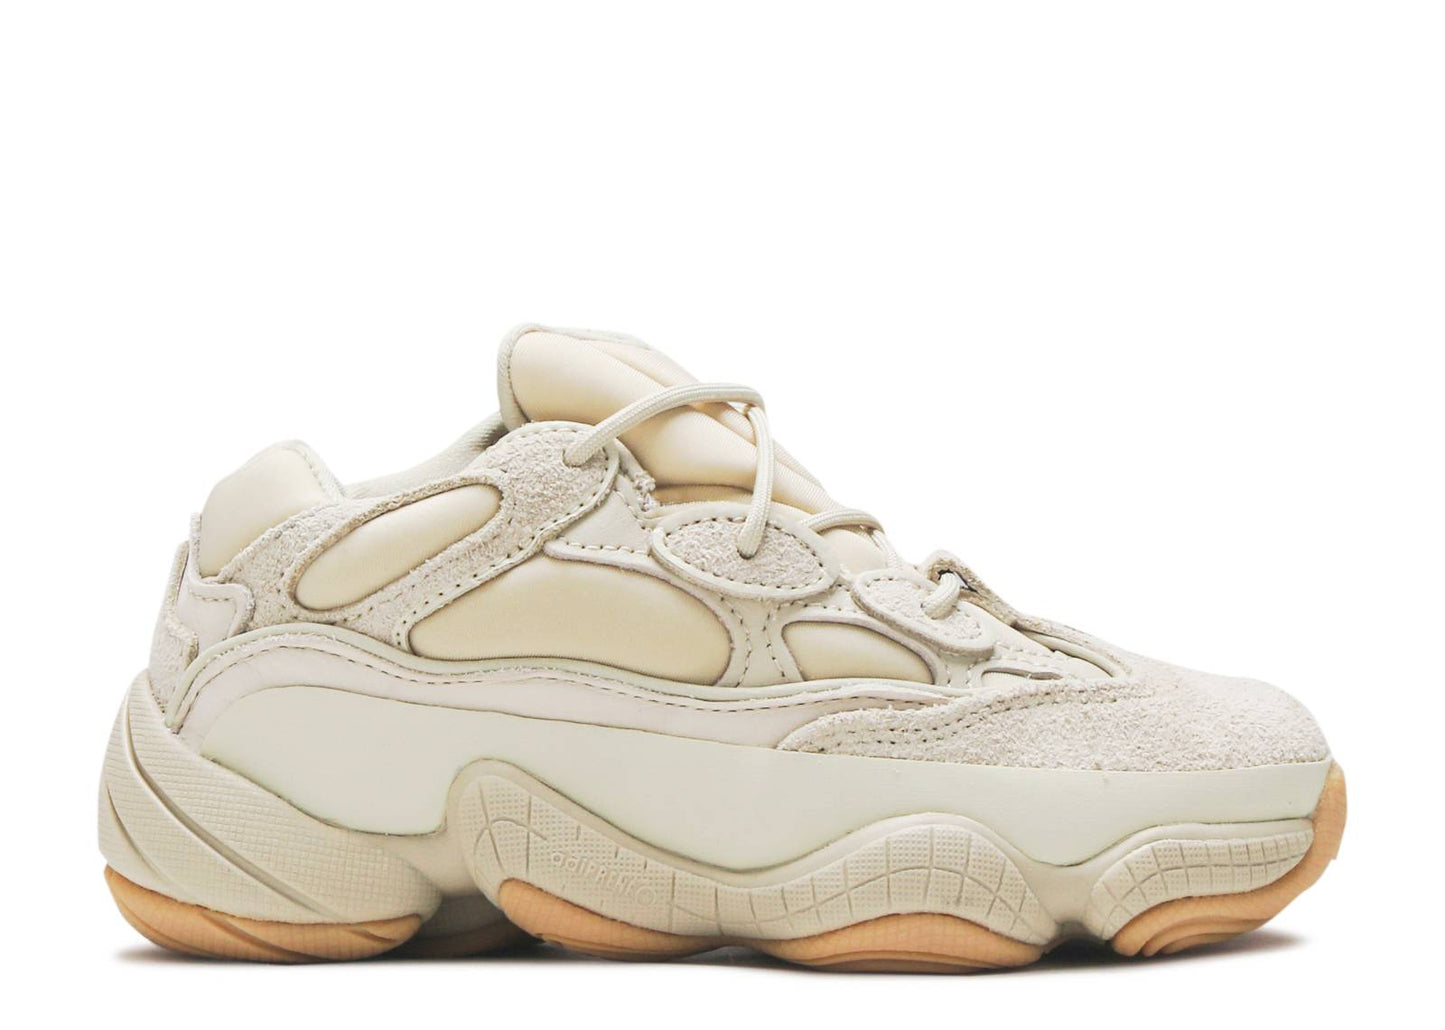 Load image into Gallery viewer, Adidas Yeezy 500 Stone (Kids)
